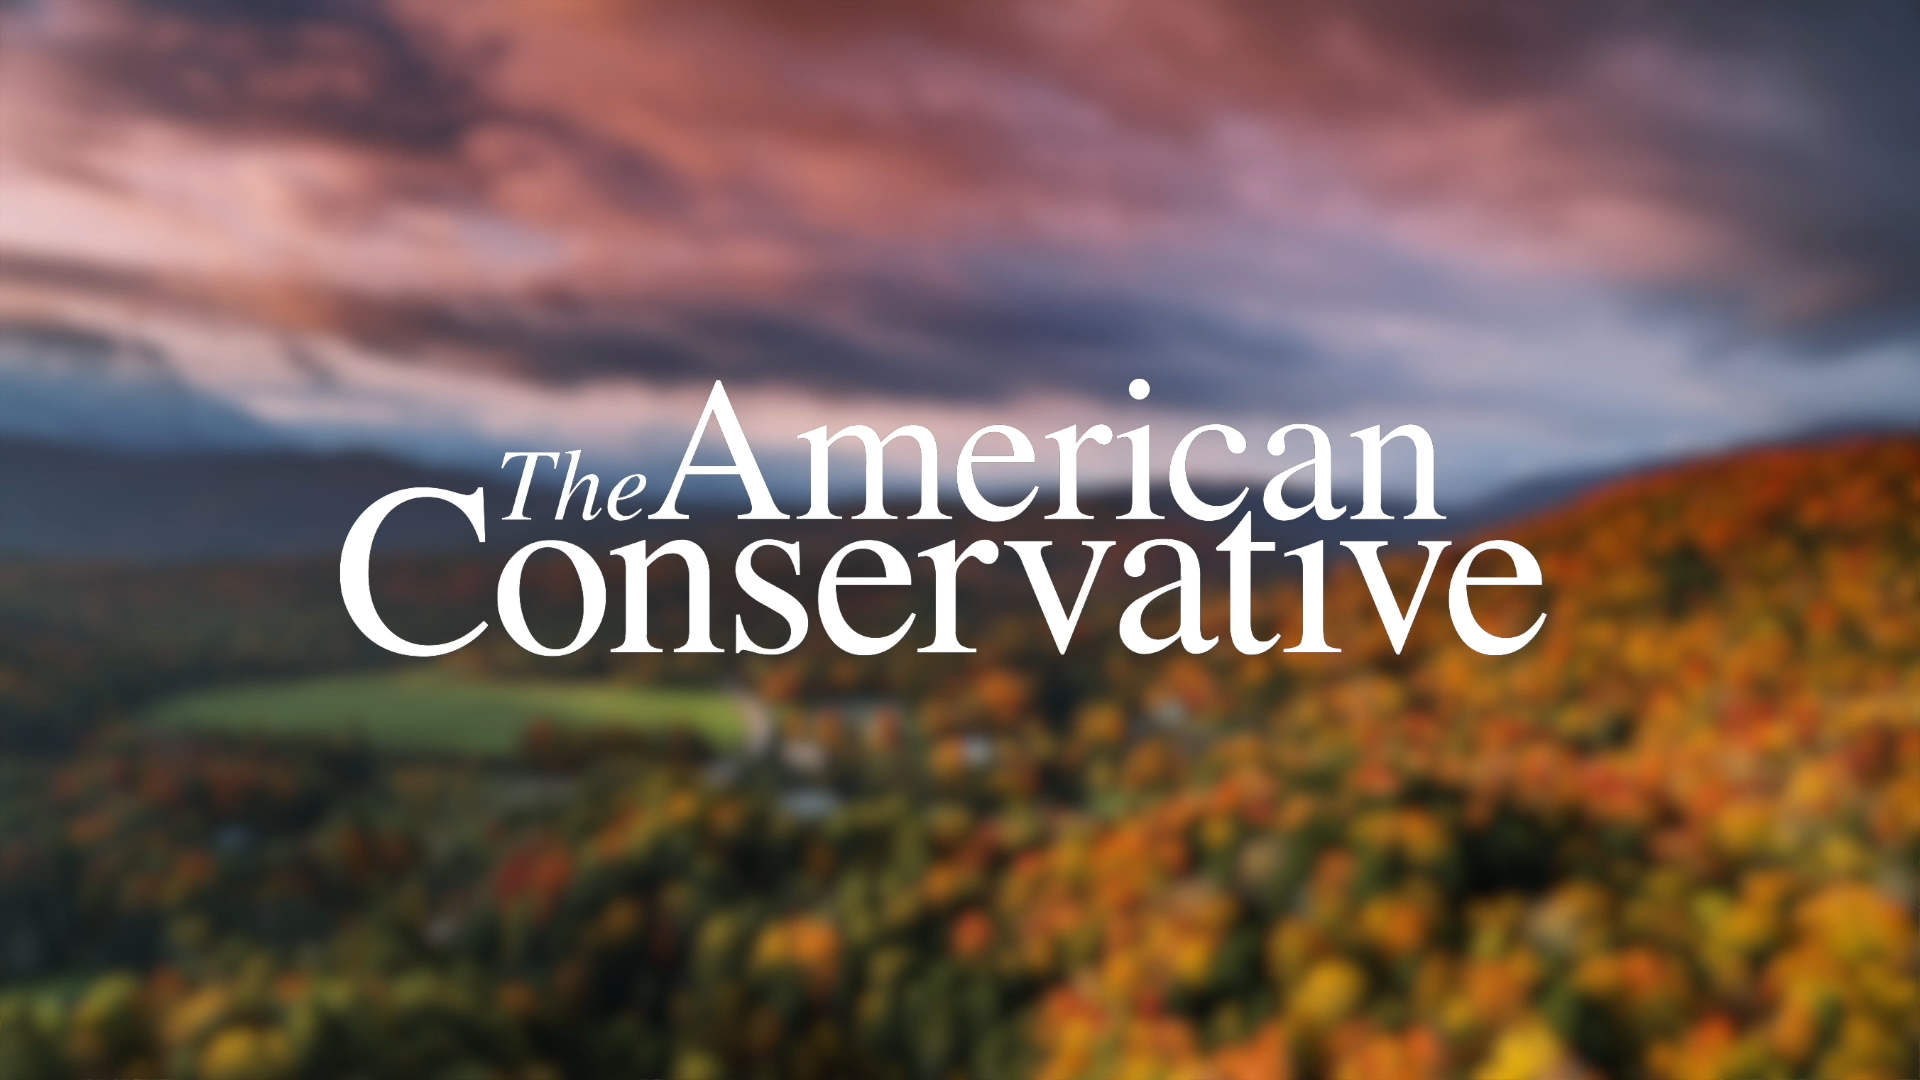 Update on the Future of The American Conservative